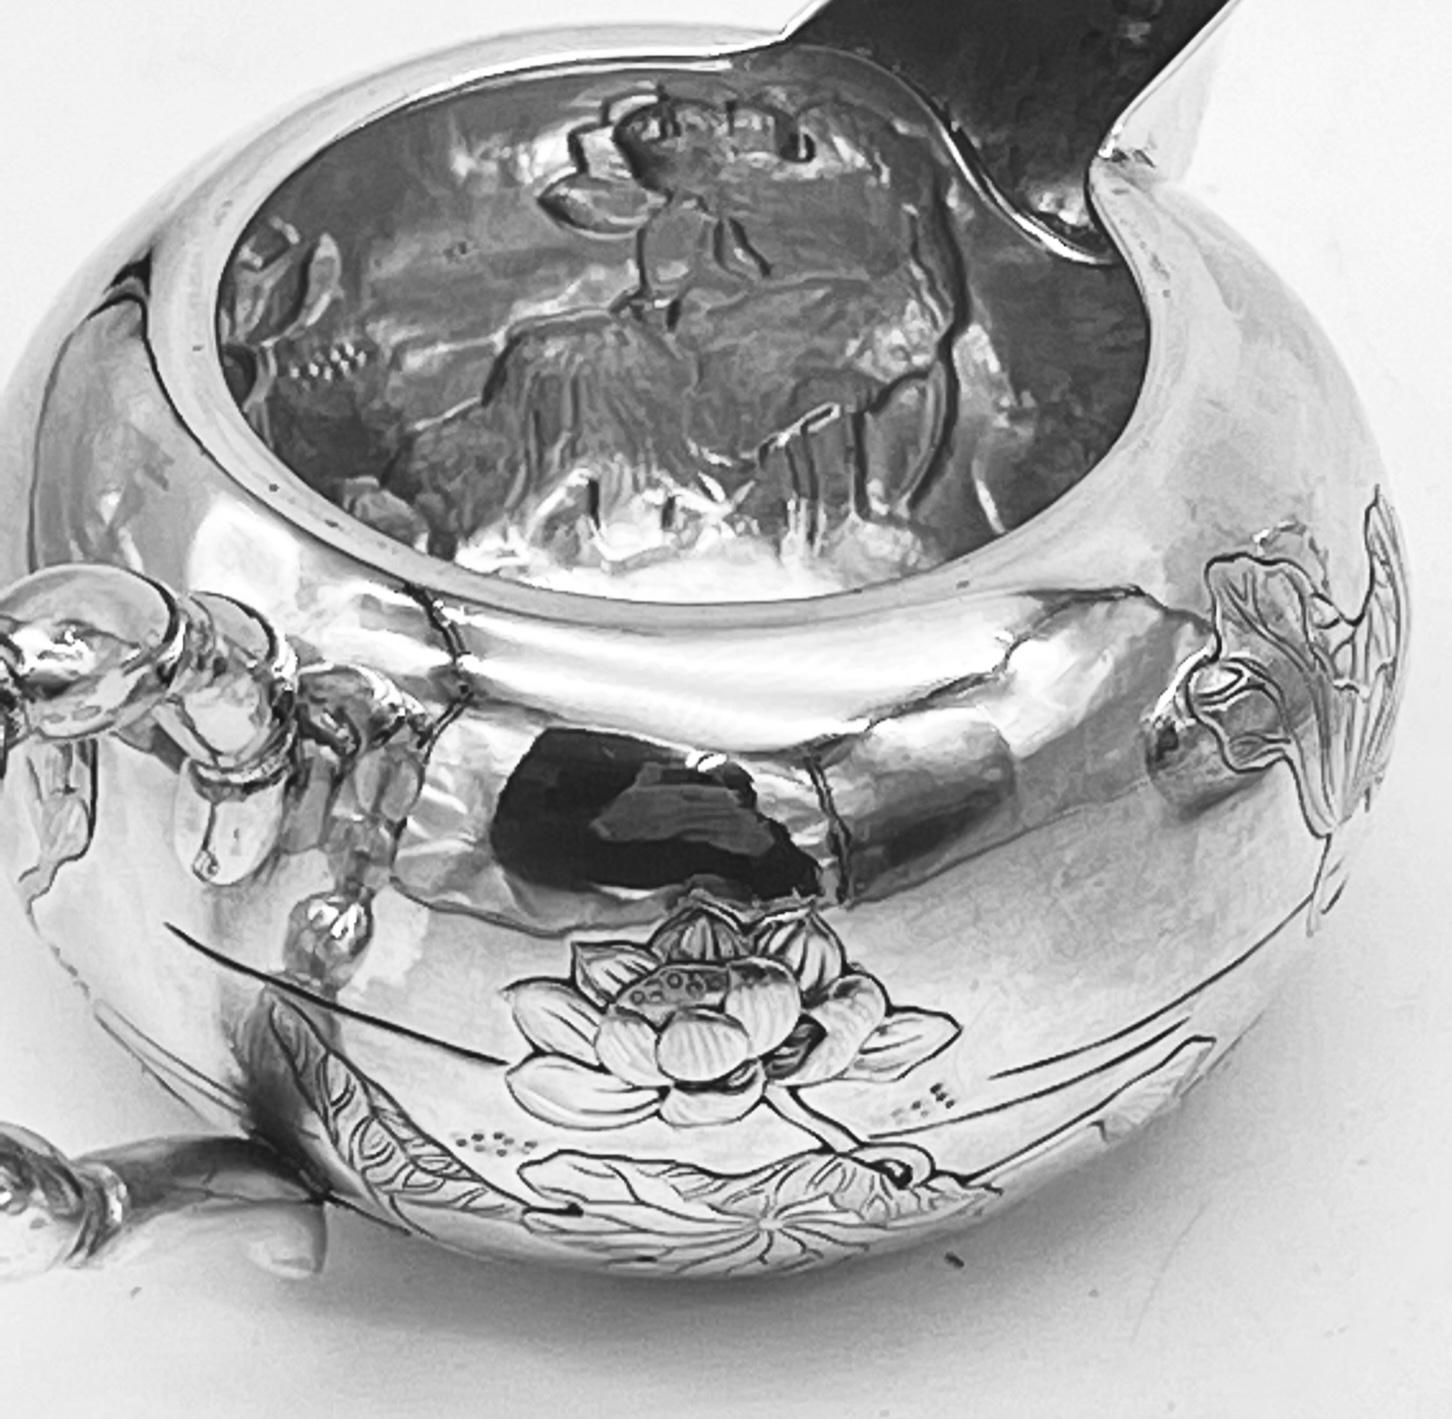 Chinese Export Silver Teaset 15